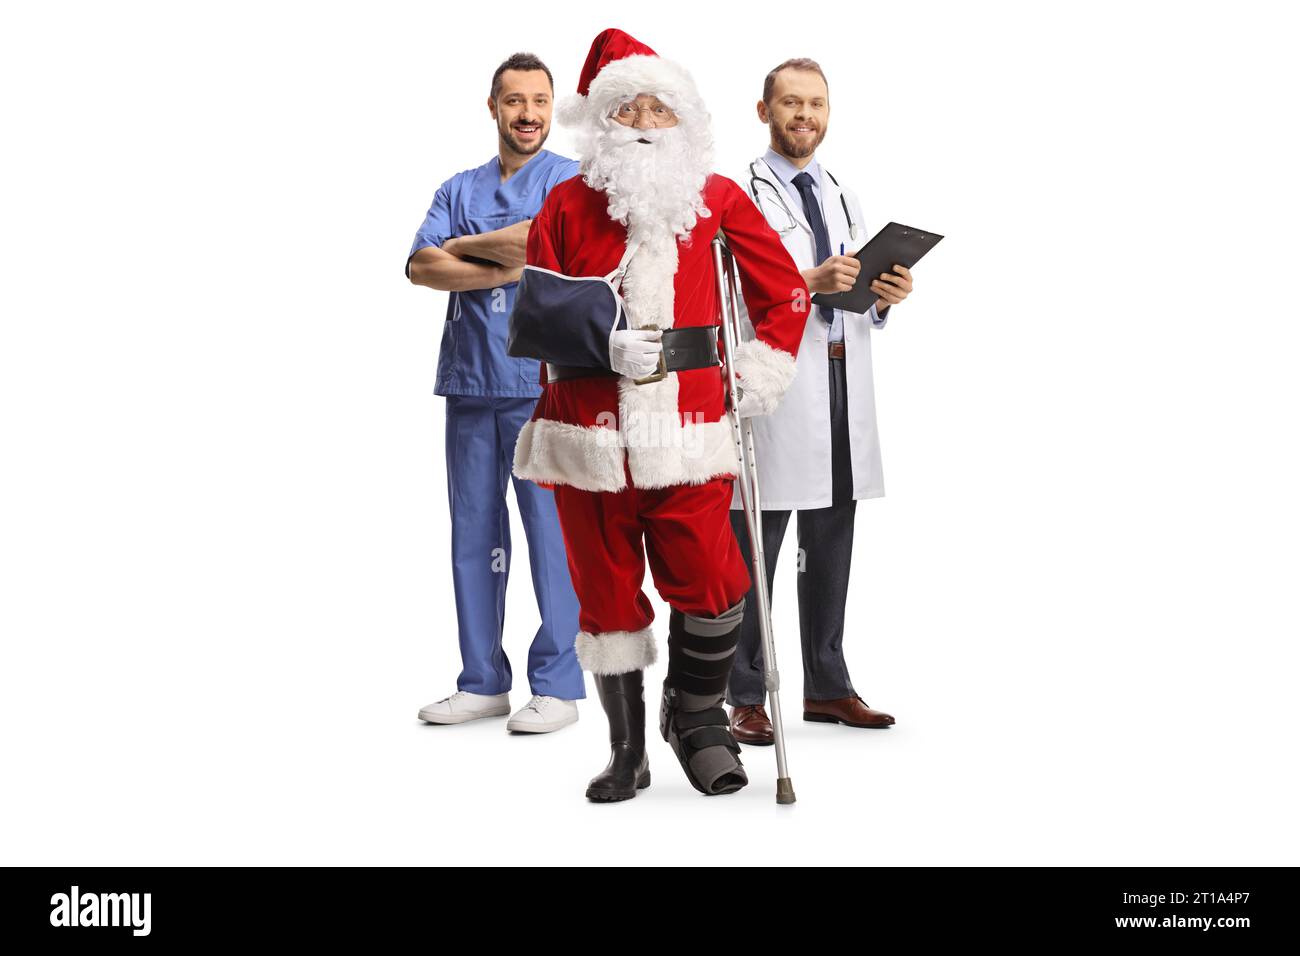 Santa claus with a foot brace and arm sling standing with a medical team isolated on white background Stock Photo